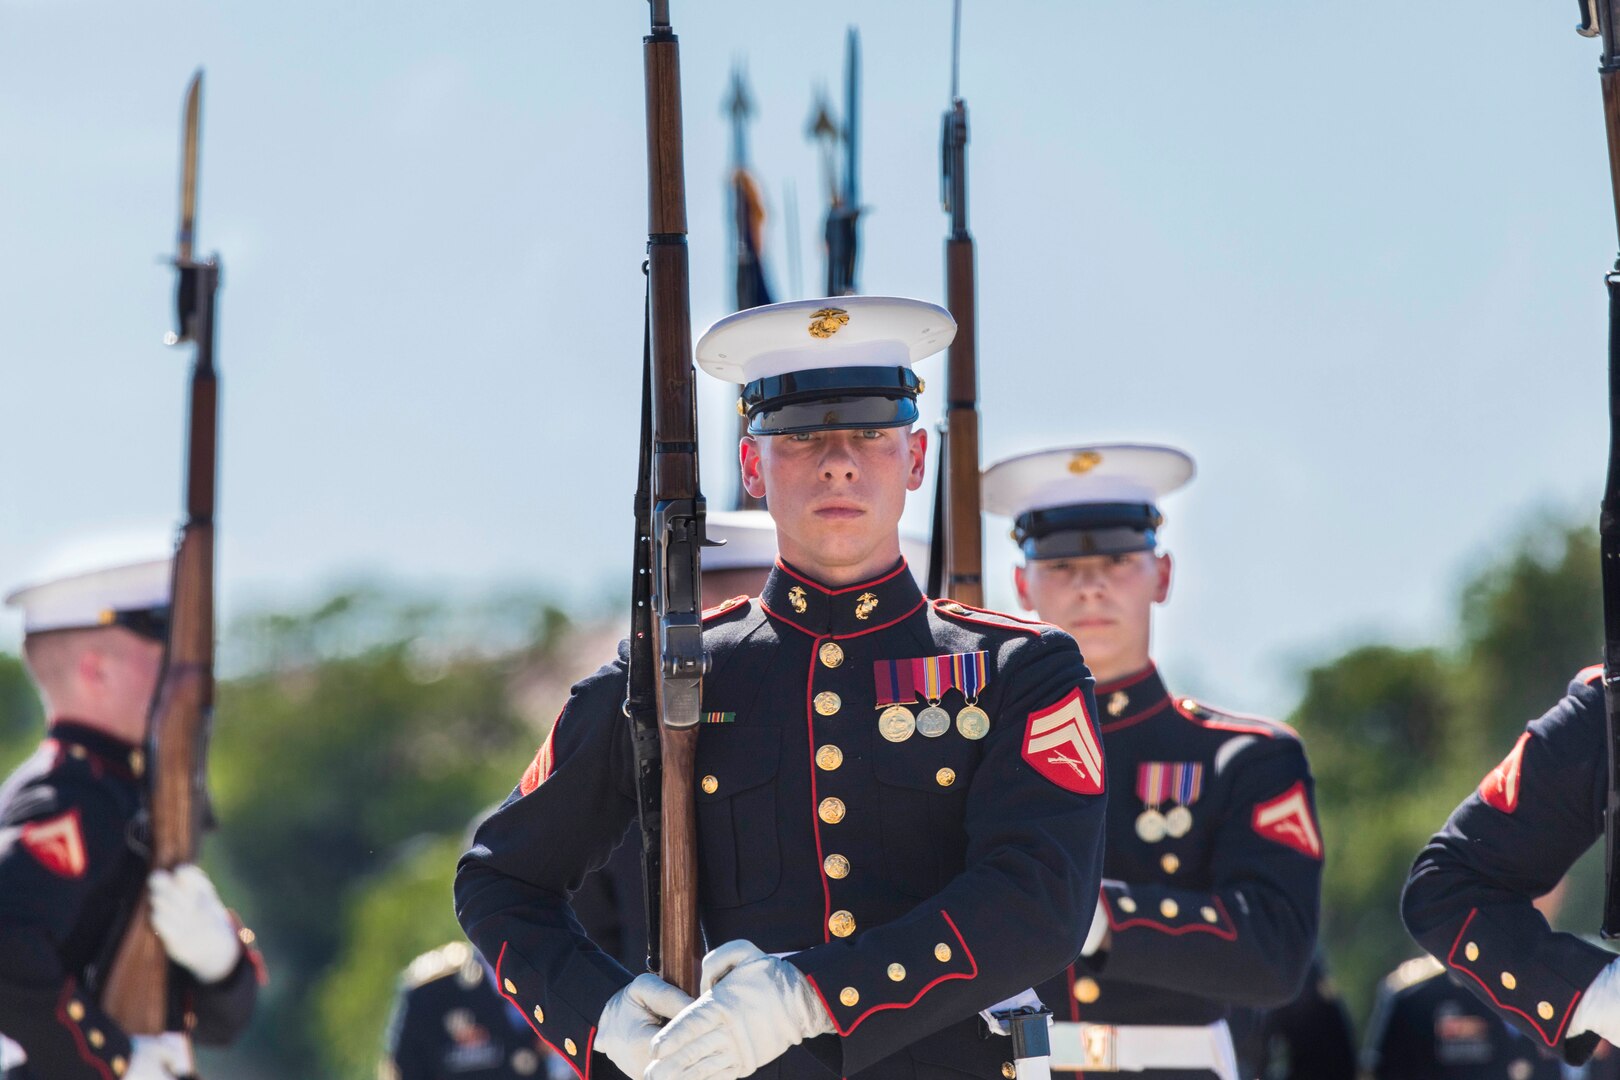 U.S. Marines with the Silent Drill Platoon execute silent exhibition drill movements during the annual Military Appreciation Weekend May 6, 2017 at Joint Base San Antonio-Fort Sam Houston, Texas. U.S. Army North and JBSA hosted the two-day event, which featured music, family activities, and various military demonstrations. This year, the appreciation weekend also commemorated the 300th anniversary for the city of San Antonio. (U.S. Air Force photo by Ismael Ortega / Released)